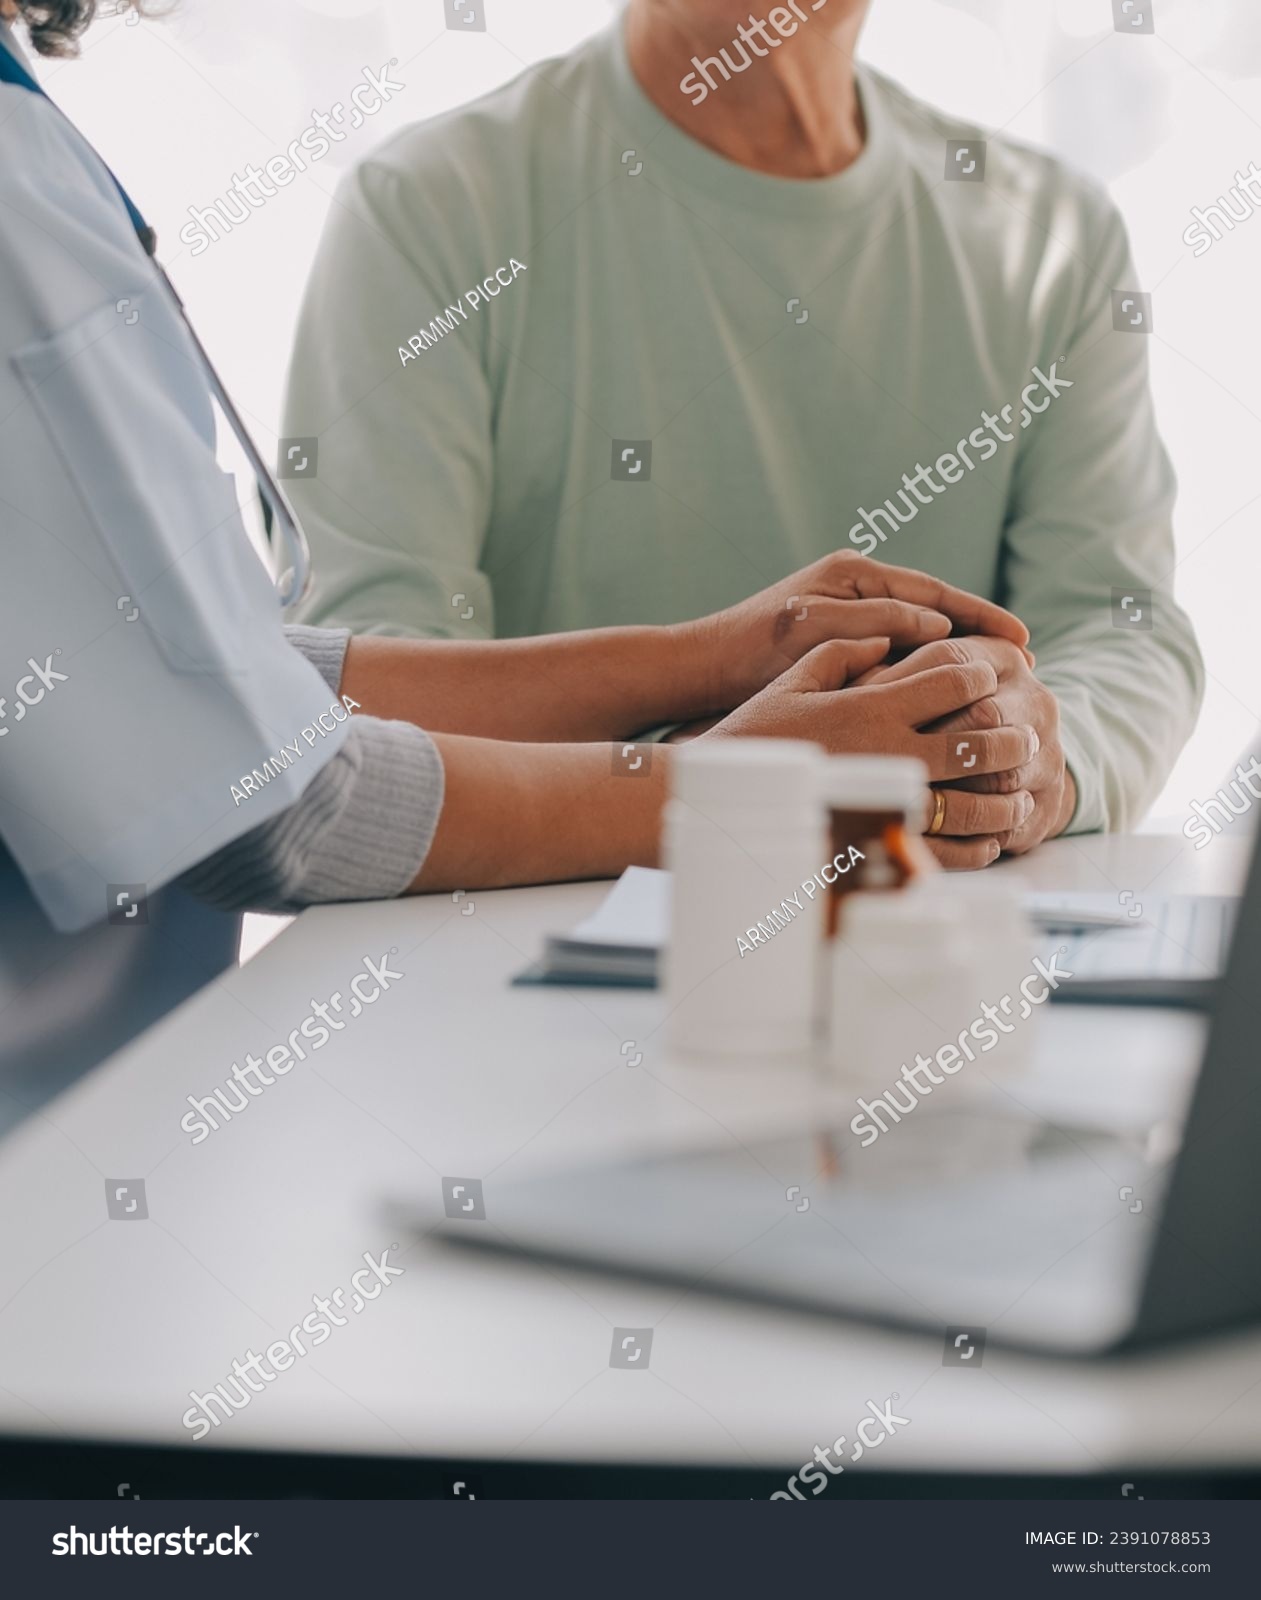 Doctor giving hope. Close up shot of young female physician leaning forward to smiling elderly lady patient holding her hand in palms. Woman caretaker in white coat supporting encouraging old person #2391078853